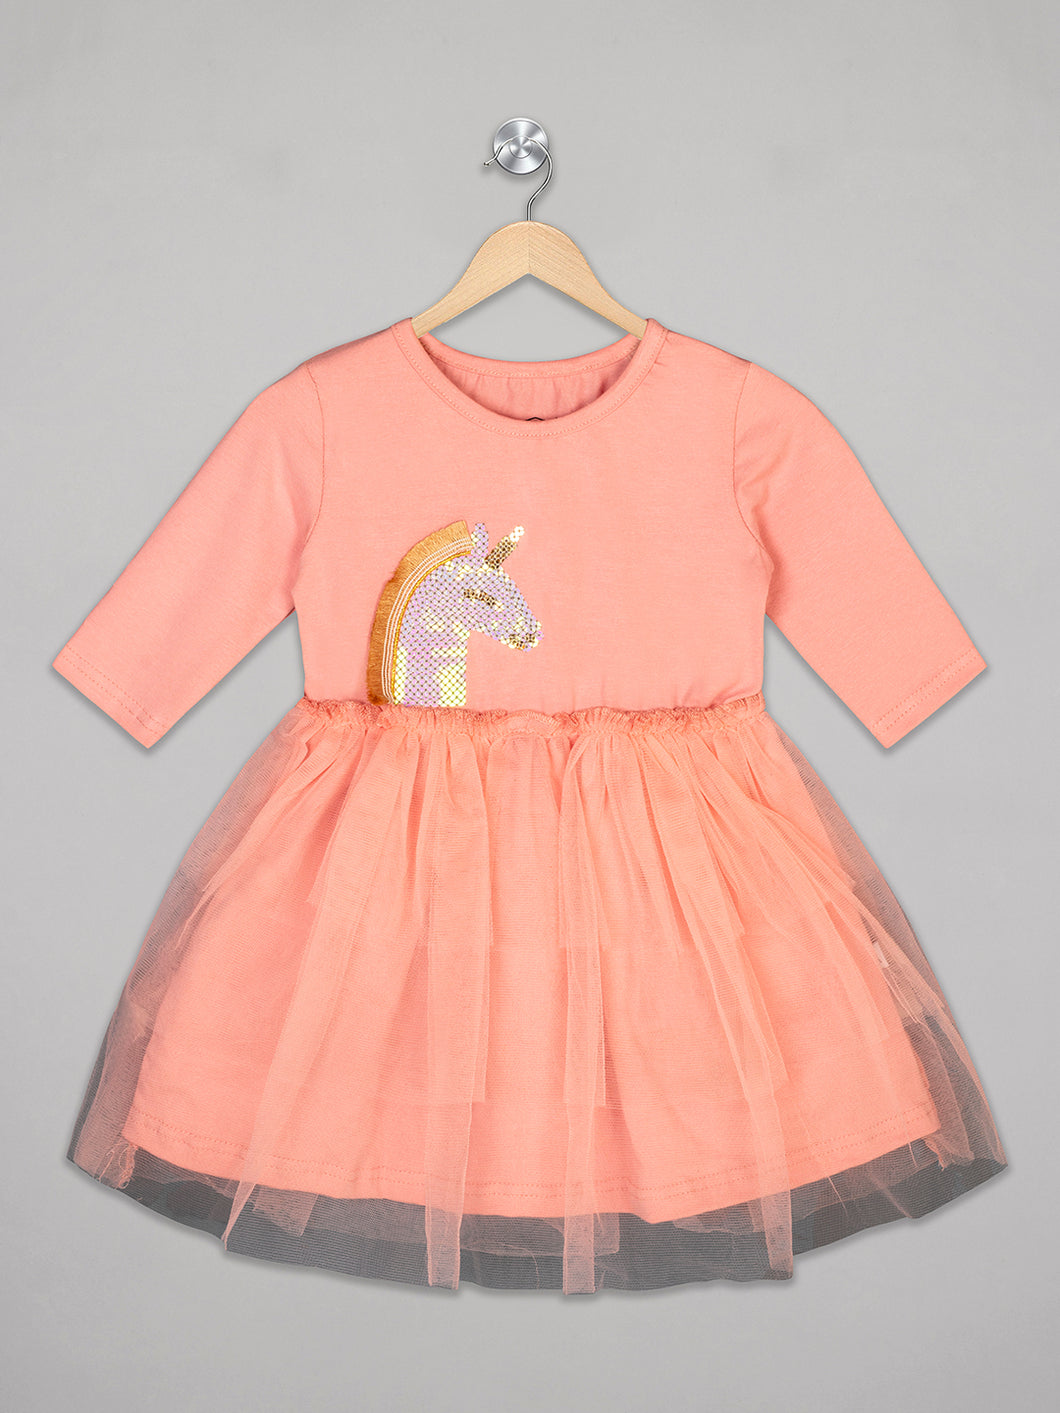 The Sandbox Clothing Co  frock  8032